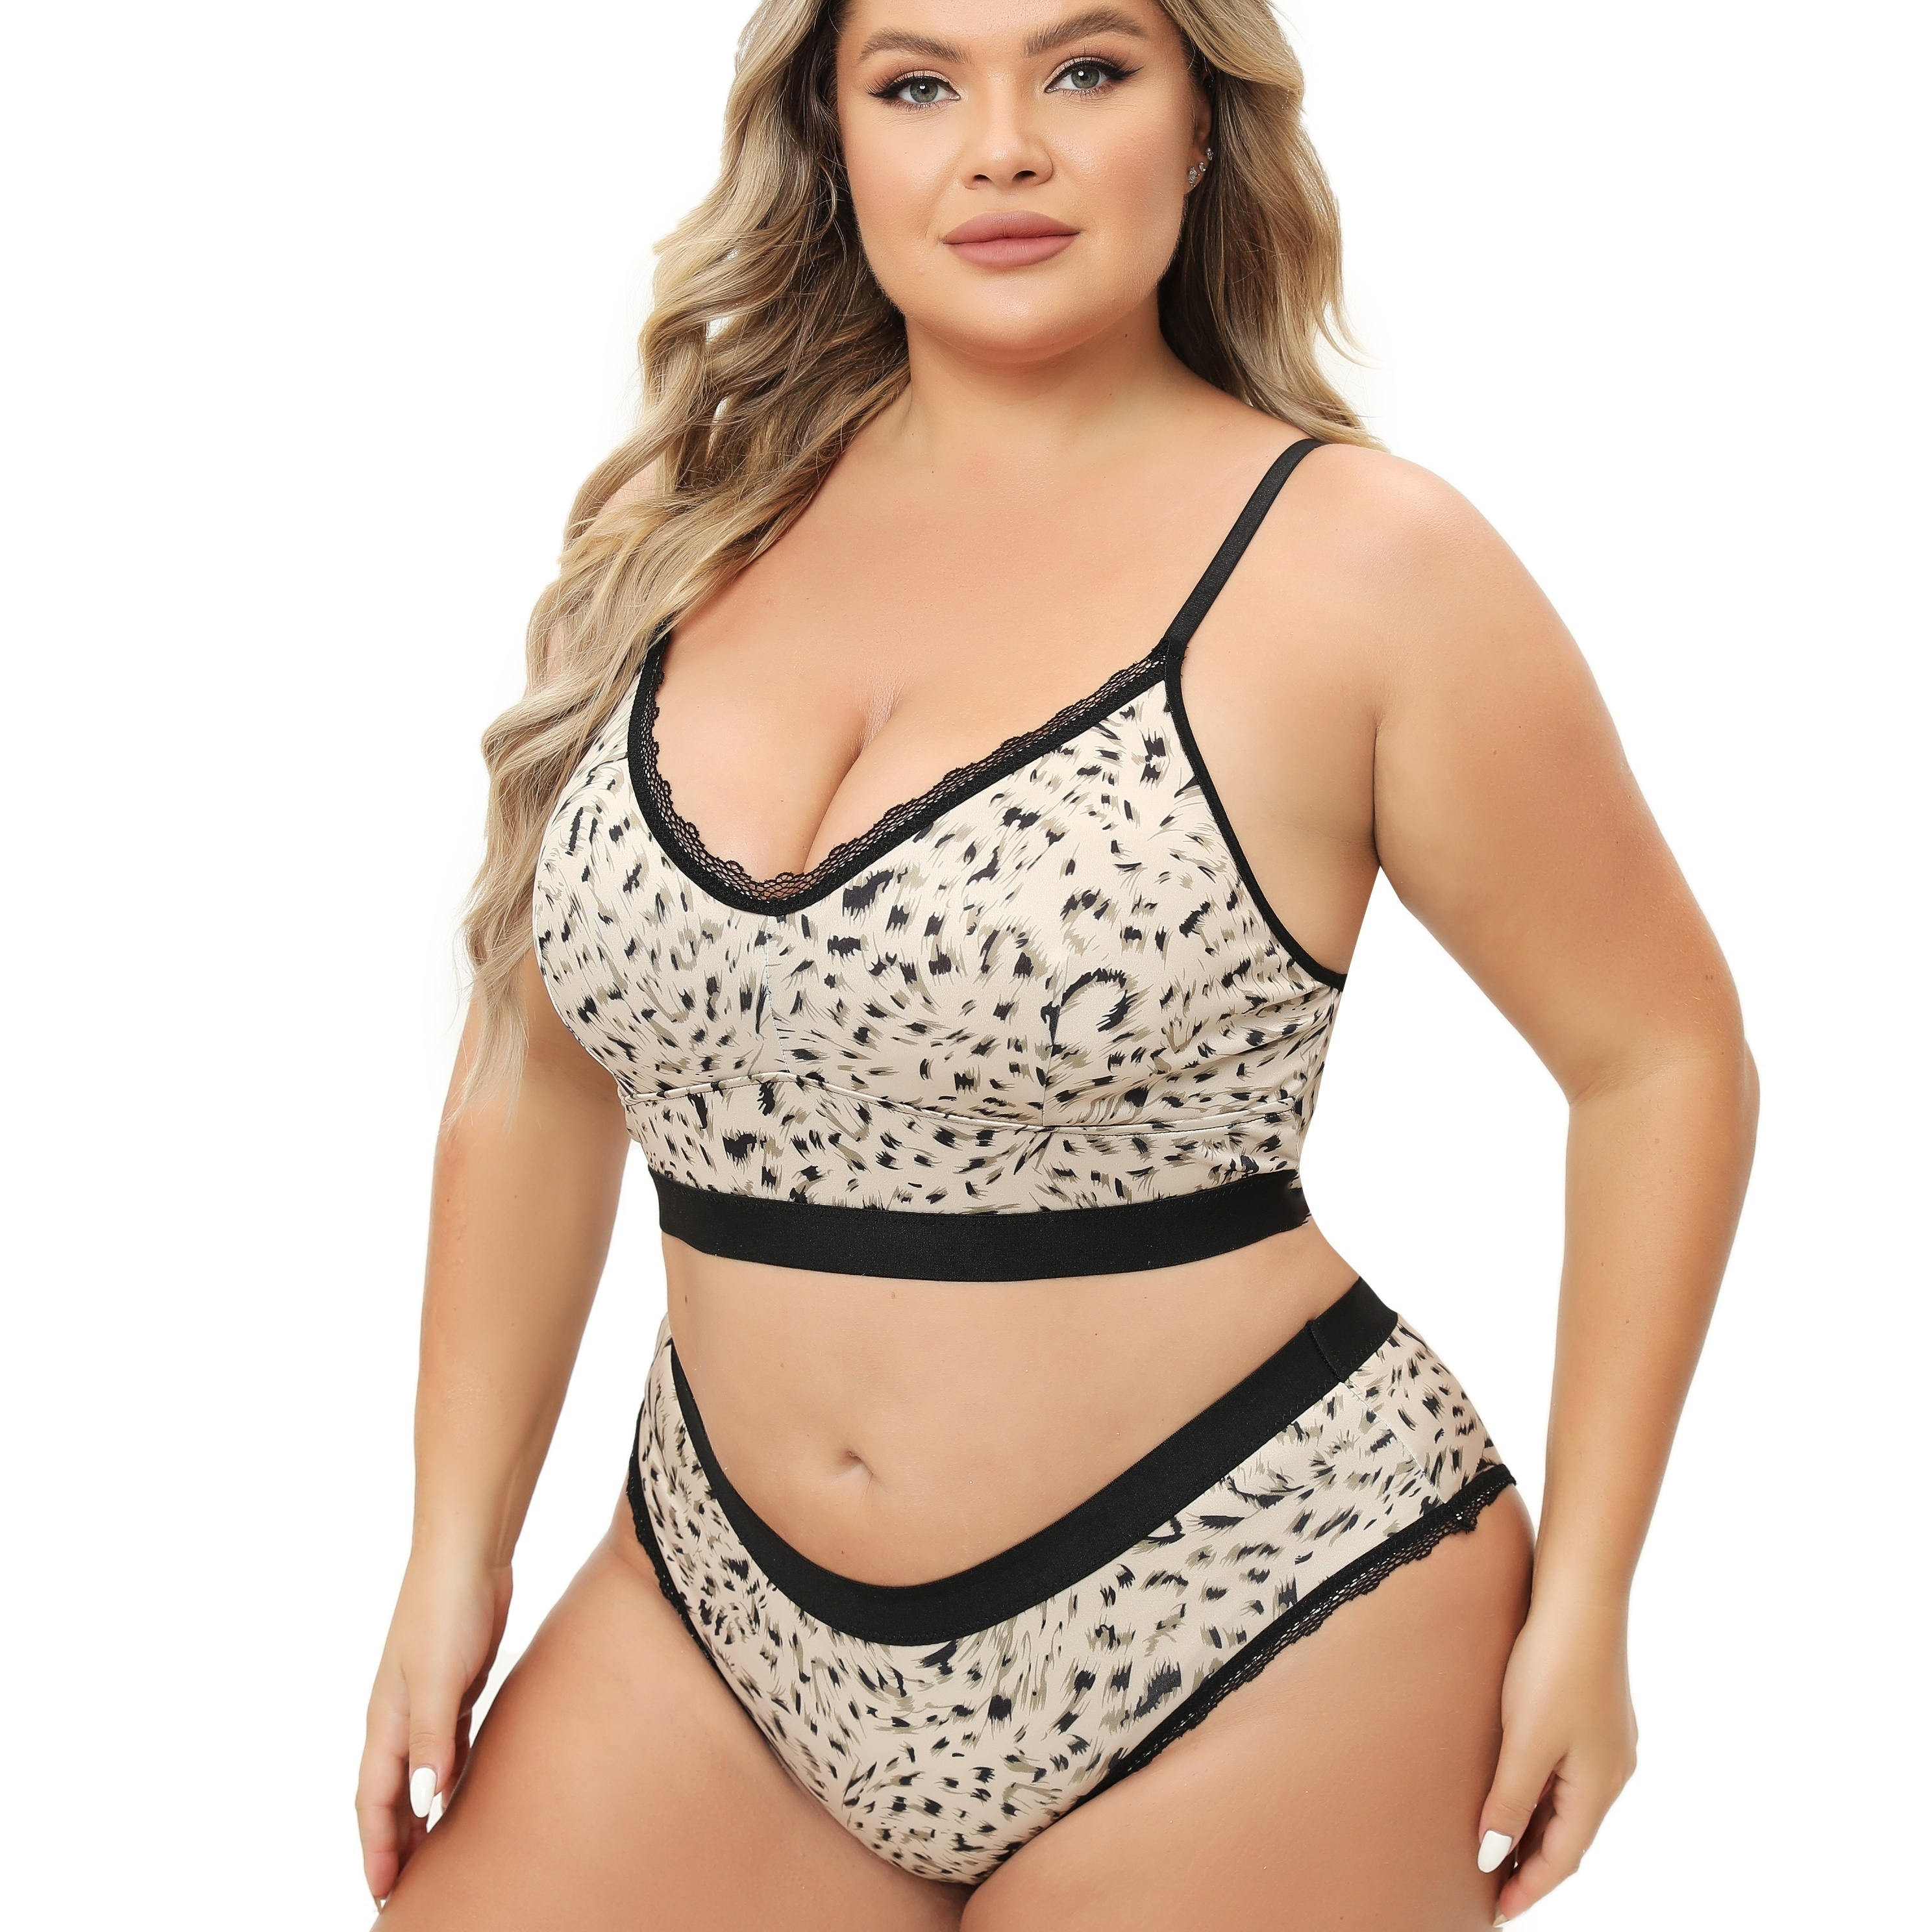 VerPetridure Sexy Lingerie for Women Plus Size Womens Sexy Leopard